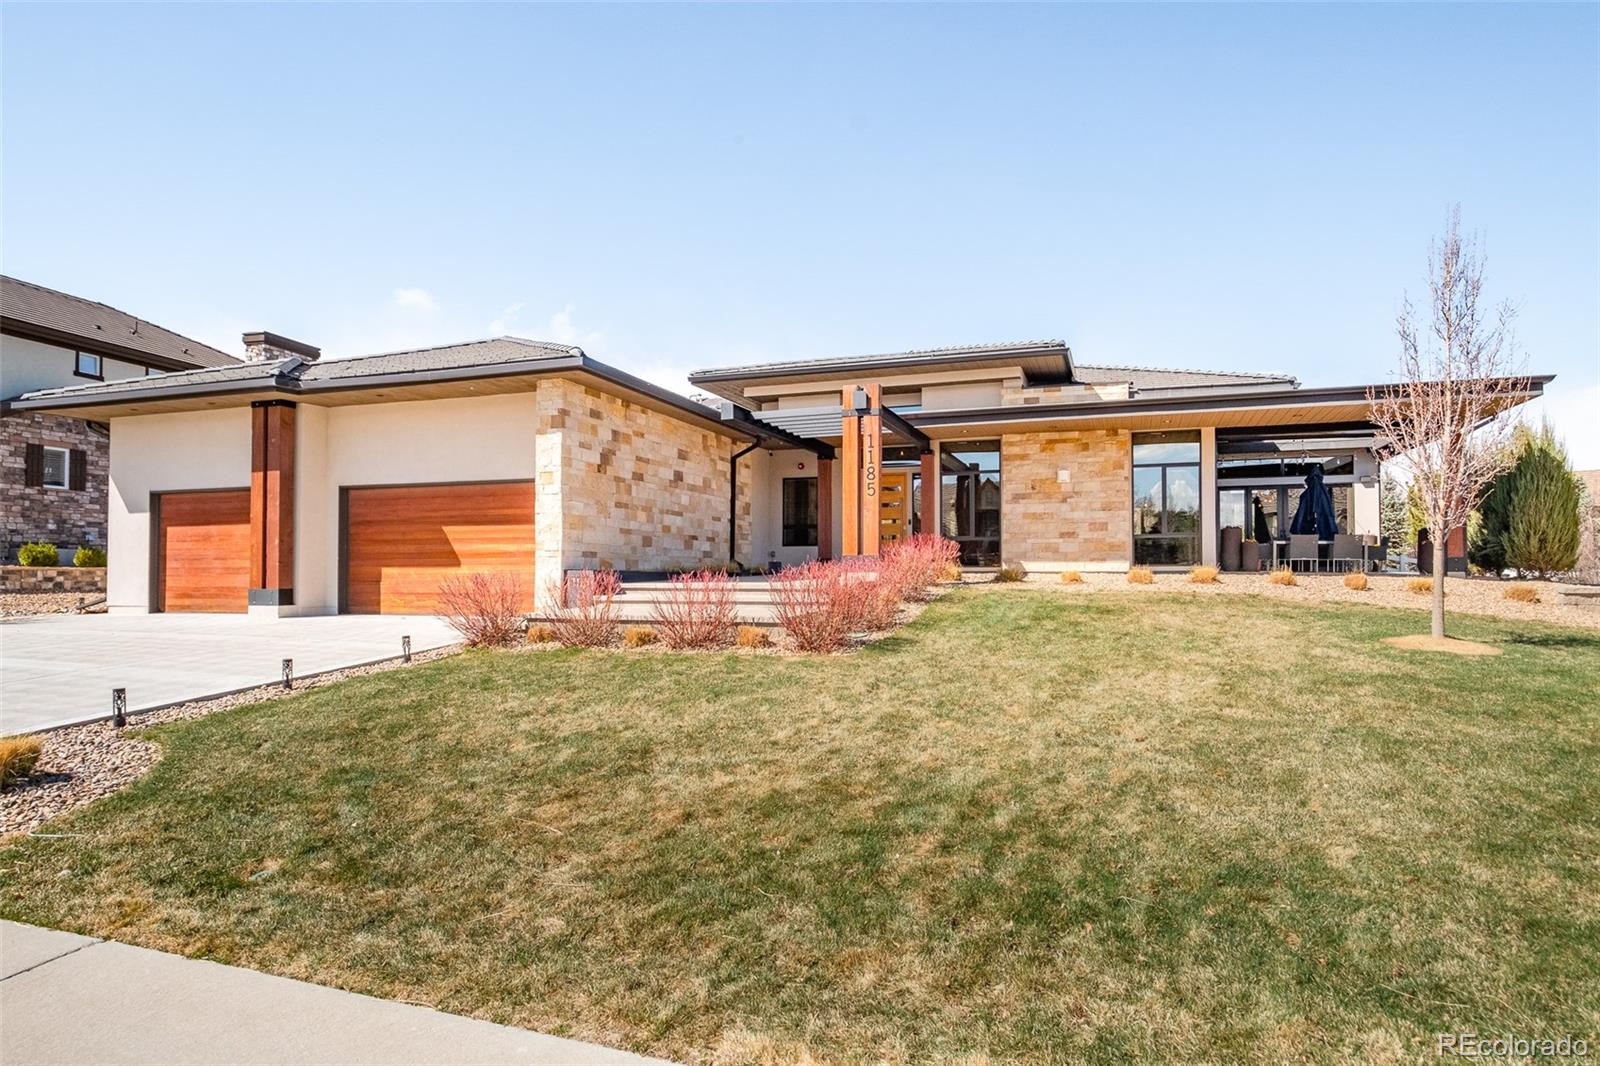 1185 141st, Westminster, CO